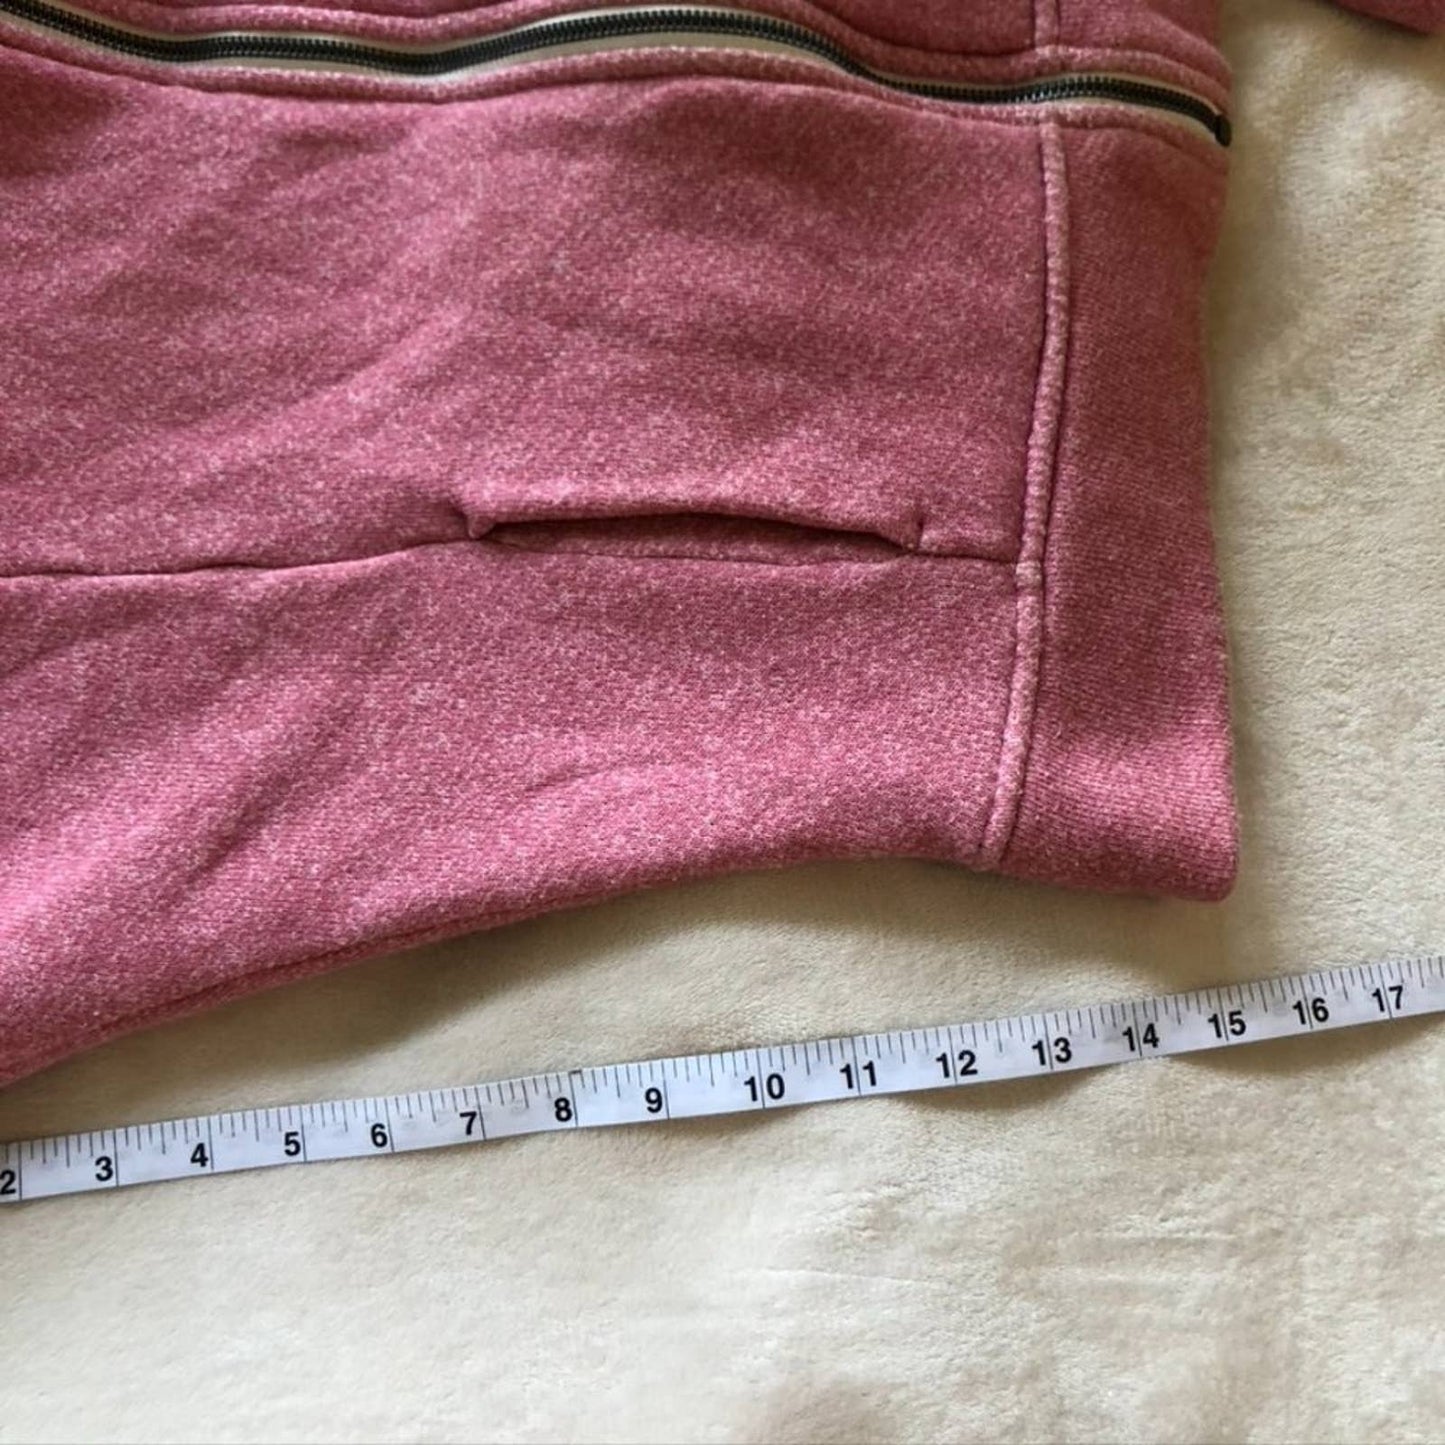 Bench Pink Hoody - Size 4